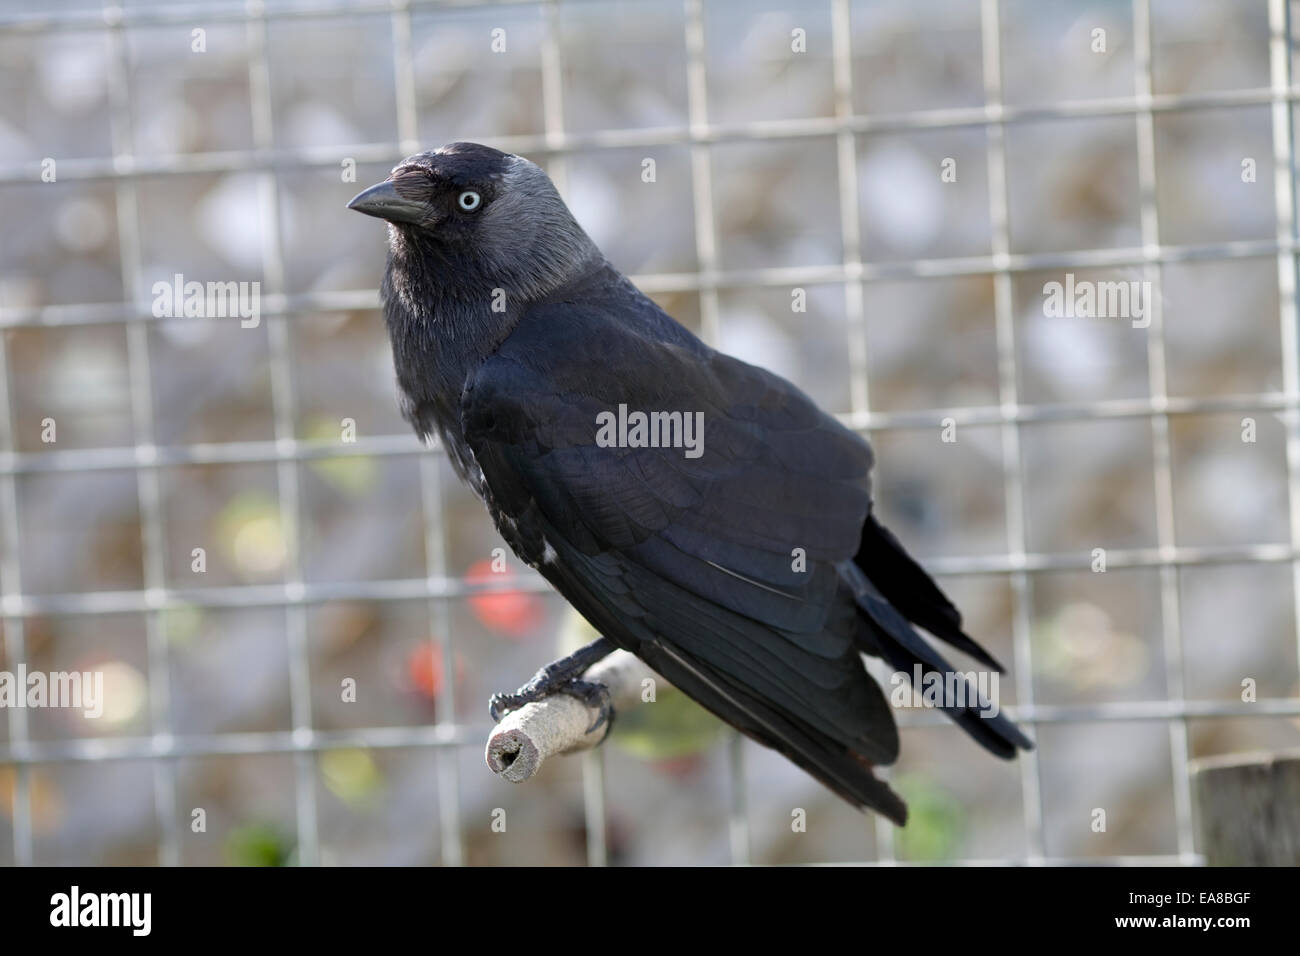 This is a captive Jackdaw, black bird member of the crow corvid family.  The background is a muted grey out of focus aviary bars Stock Photo